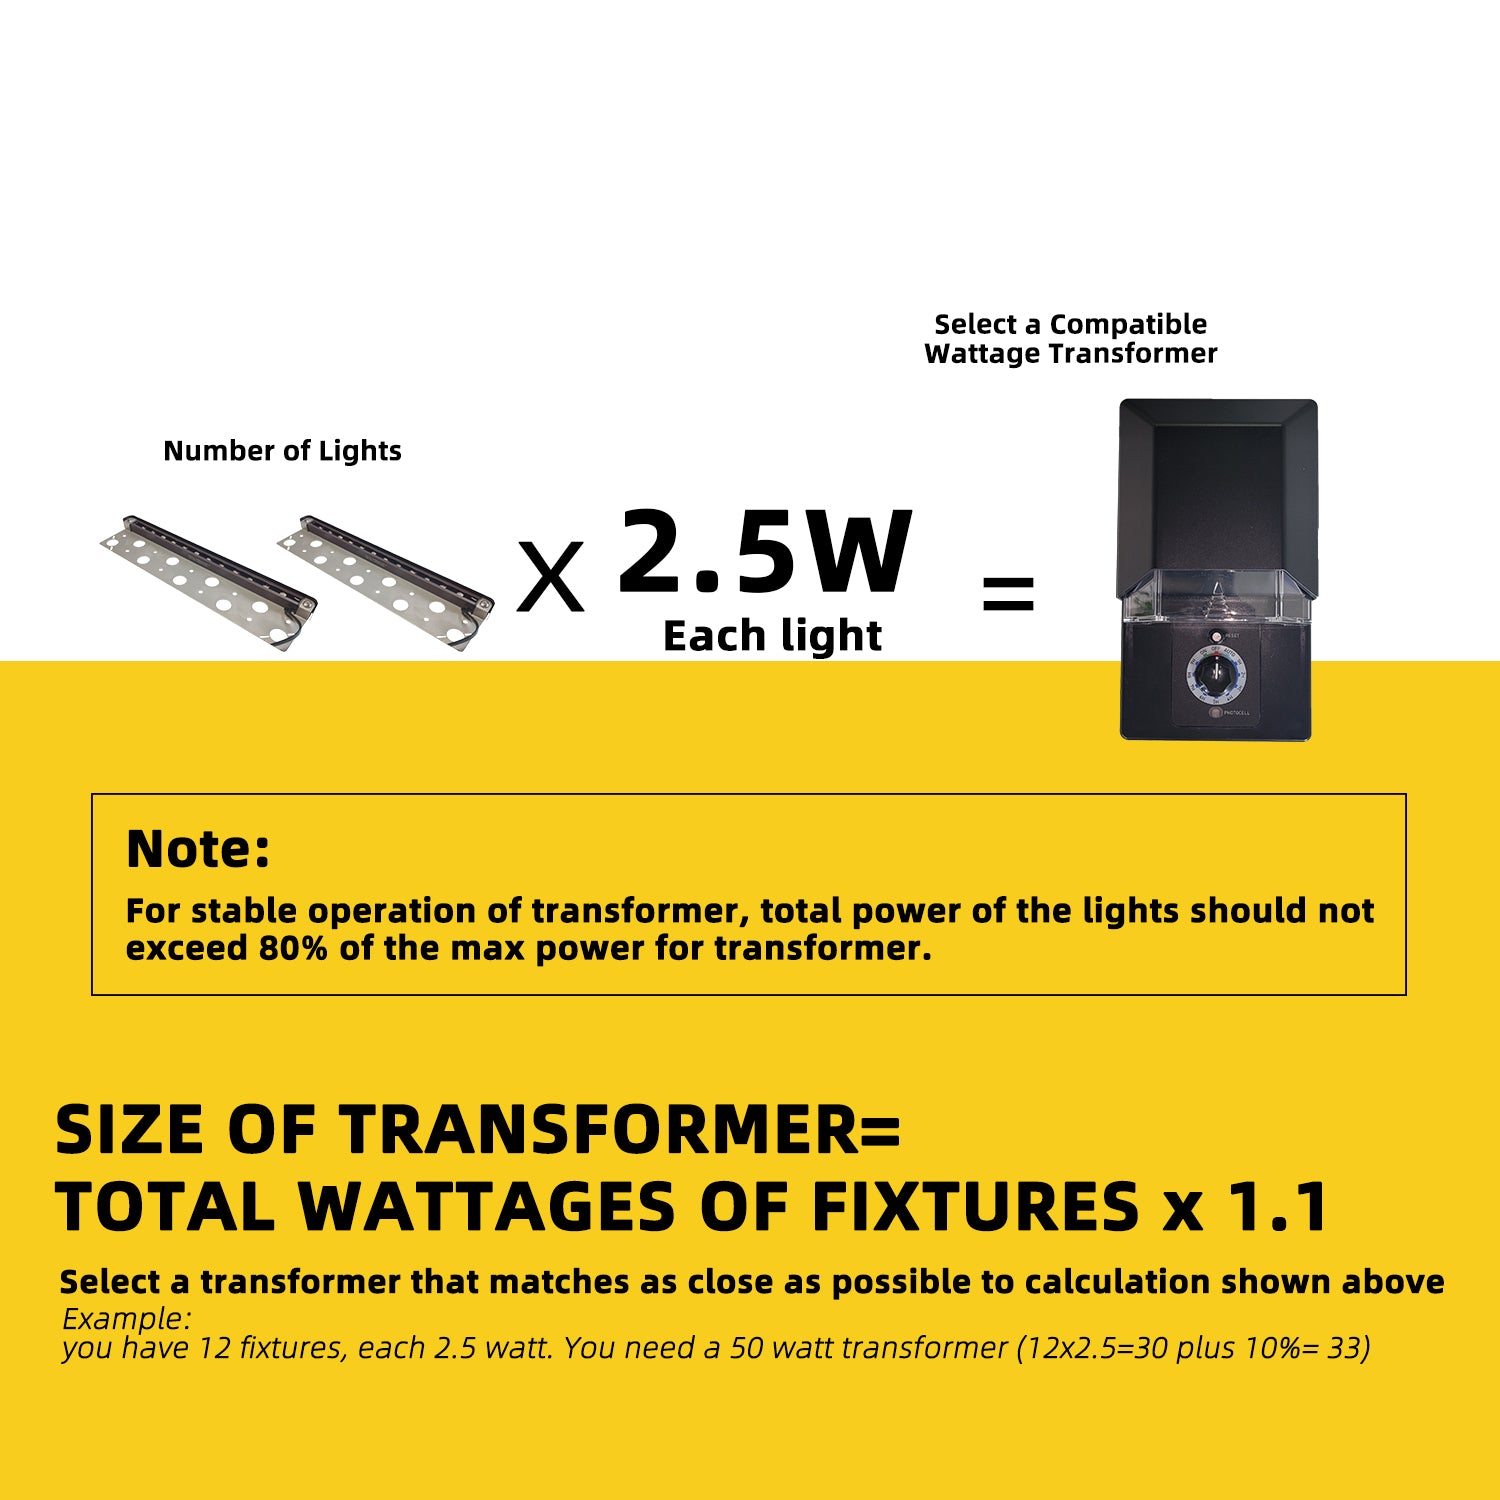 Instructional graphic for selecting a compatible wattage transformer for lighting fixtures. Includes formula and note on maximum power usage for stable operation.